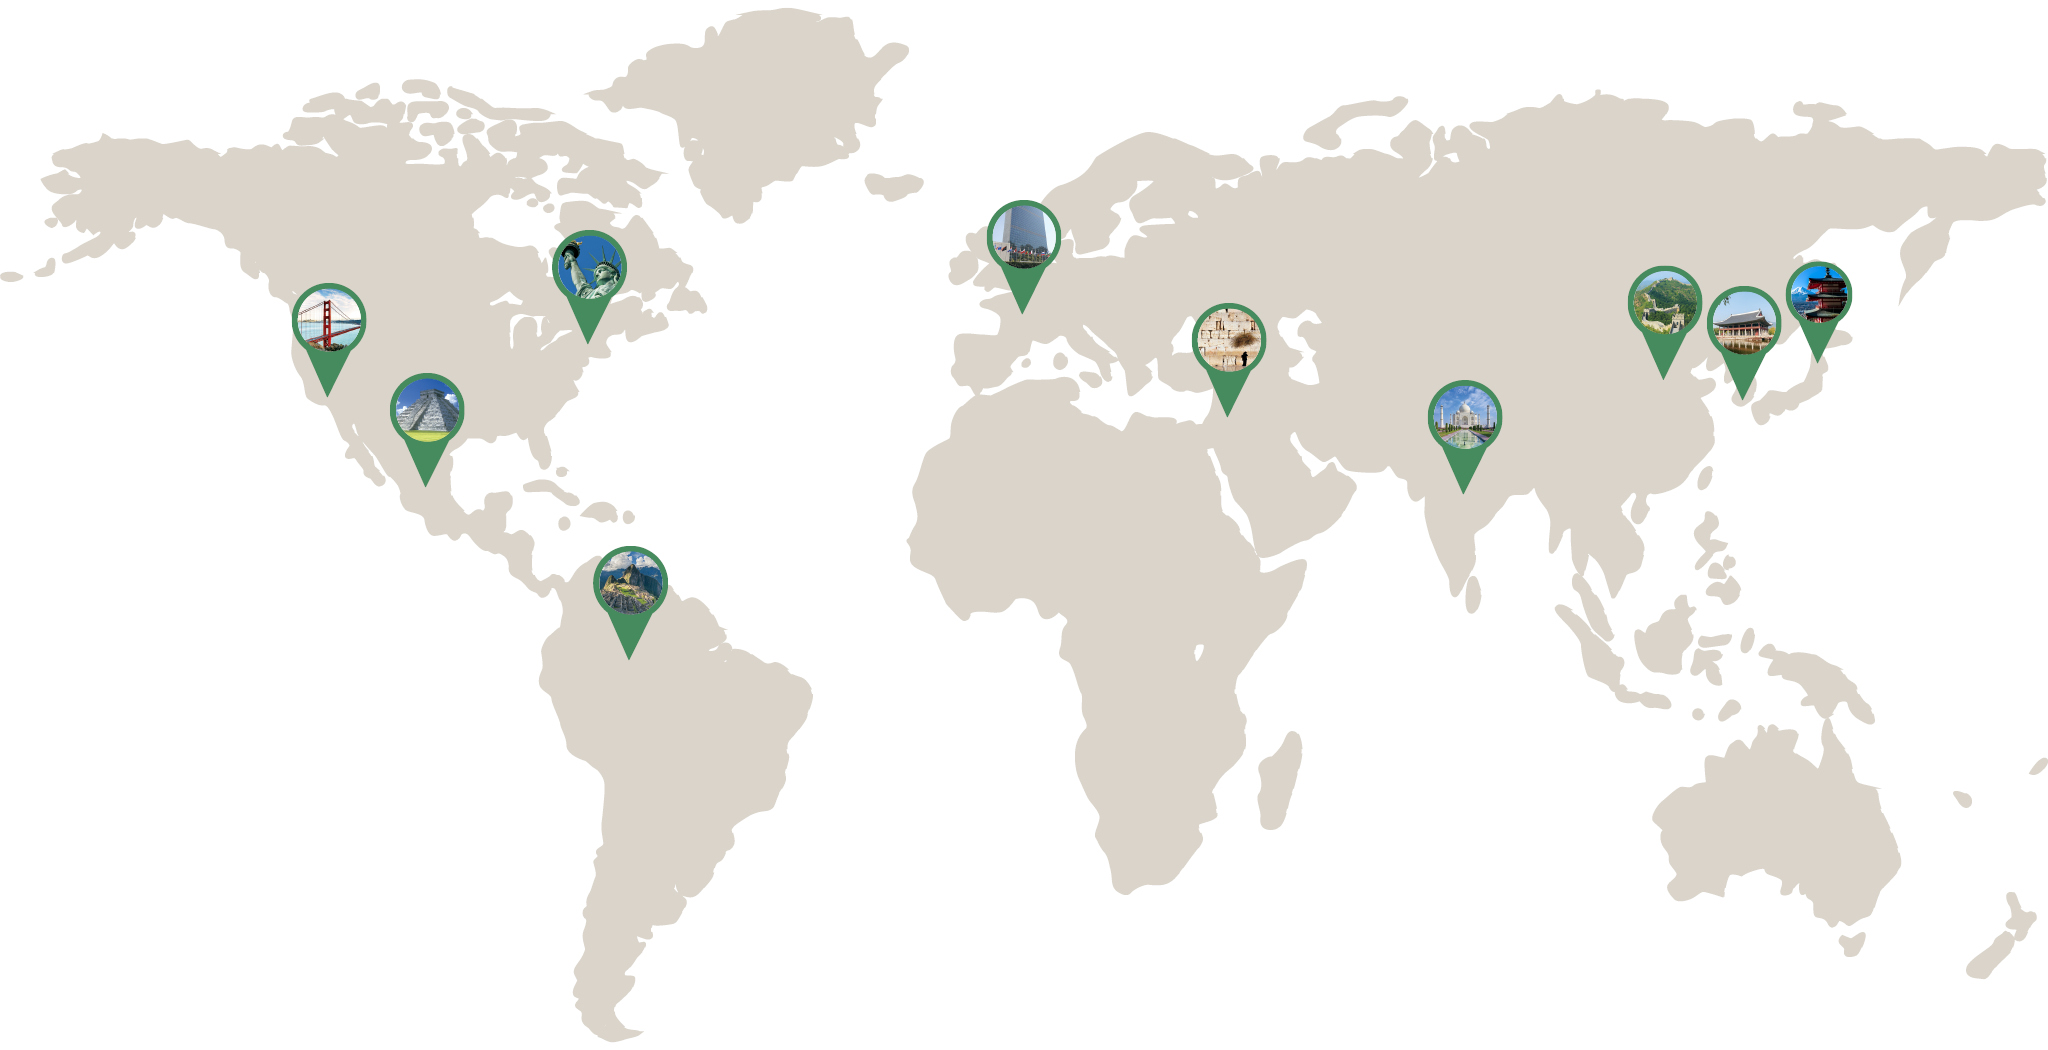 Map Of The World With Green Pins on Major Landmarks Across the Globe